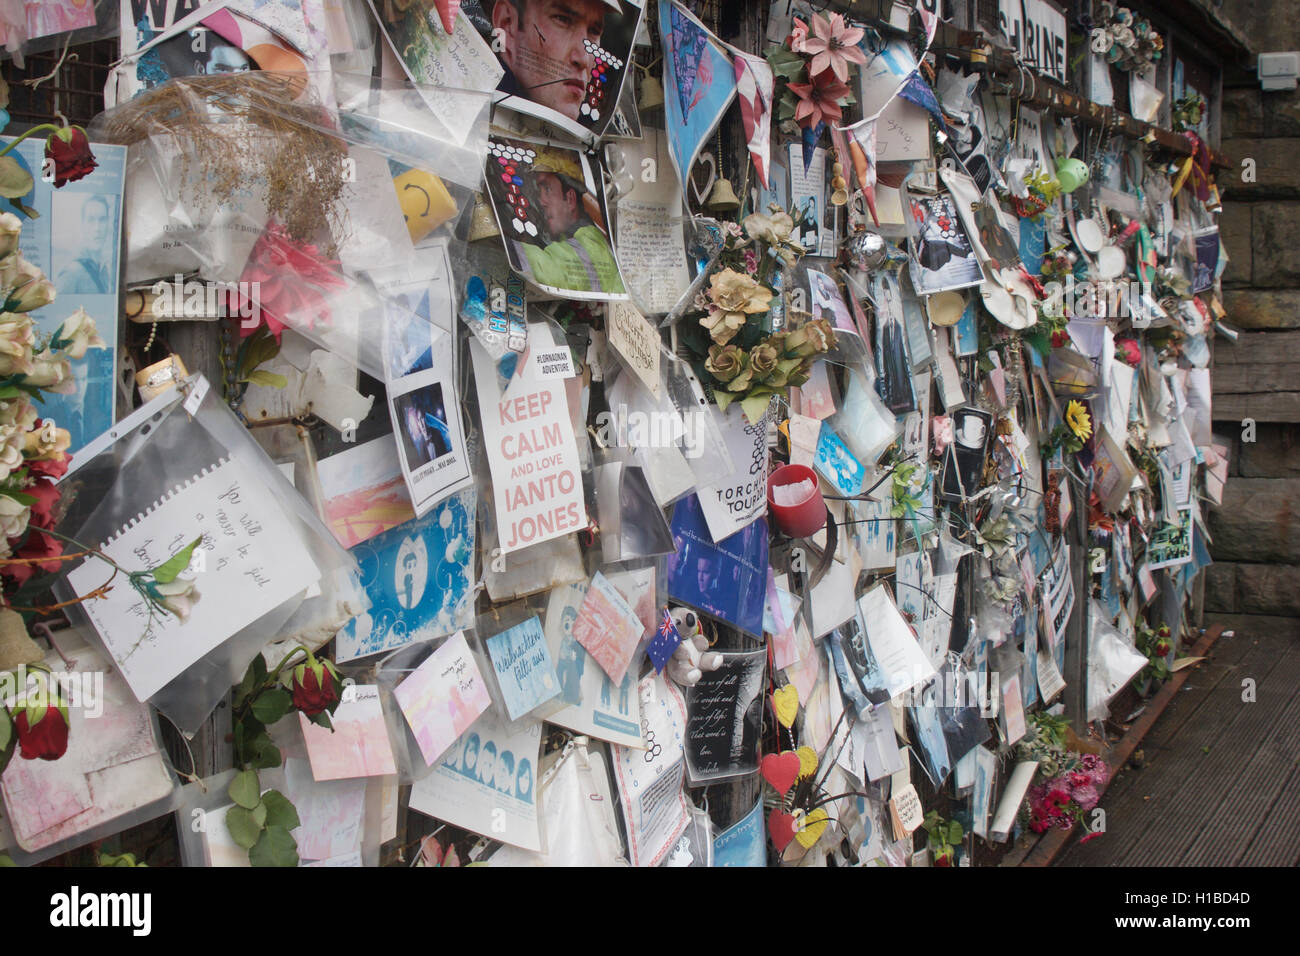 Ianto's shrine: Ianto Jones was a fictional character in the BBC television series Torchwood Stock Photo